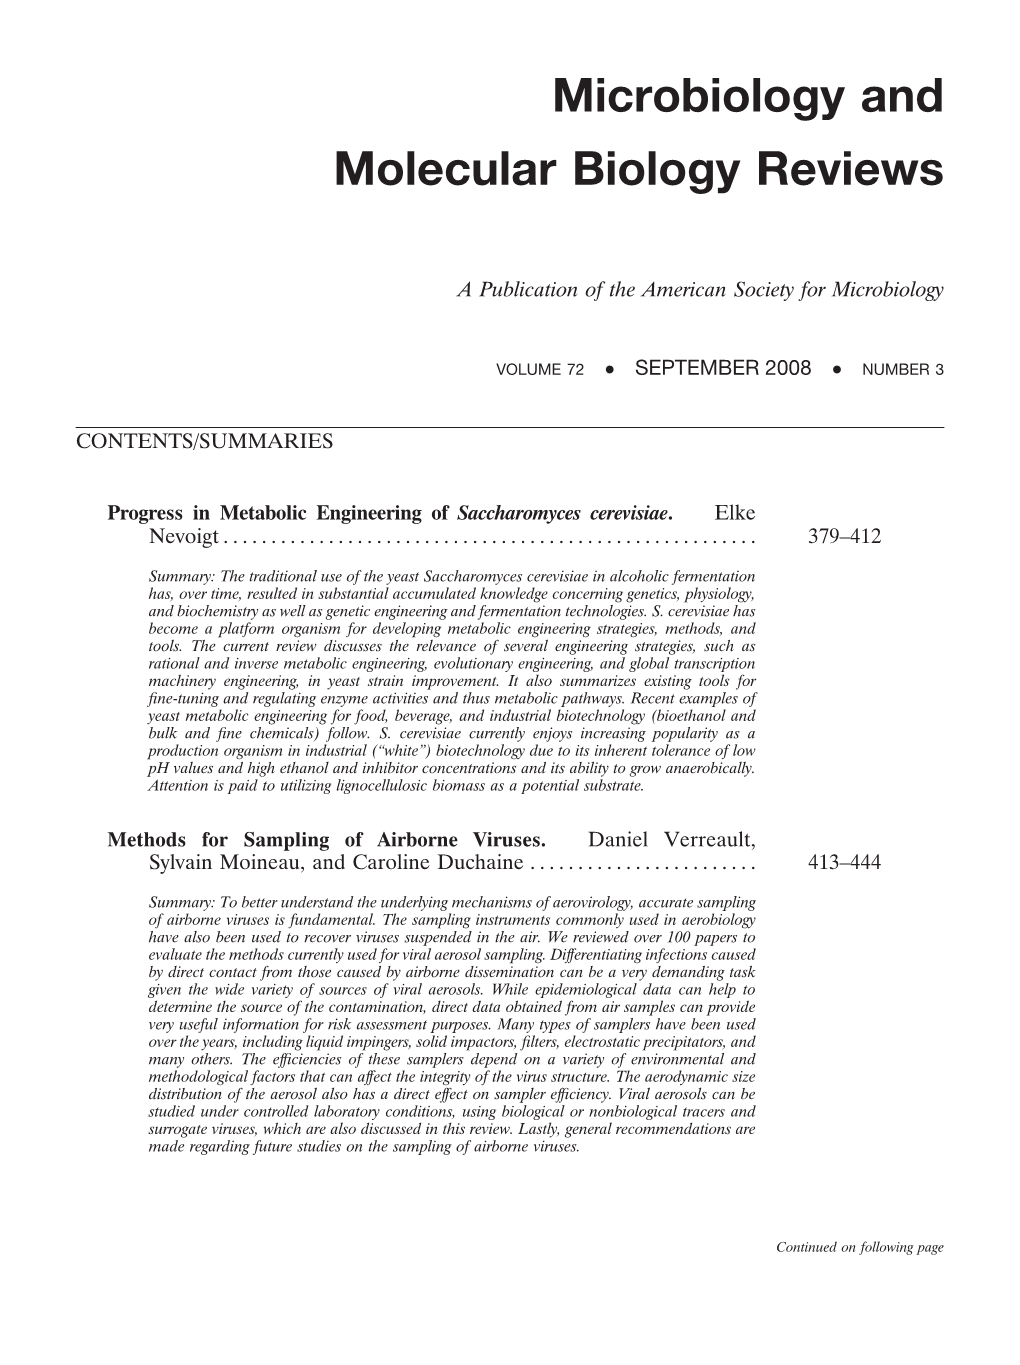 Microbiology and Molecular Biology Reviews